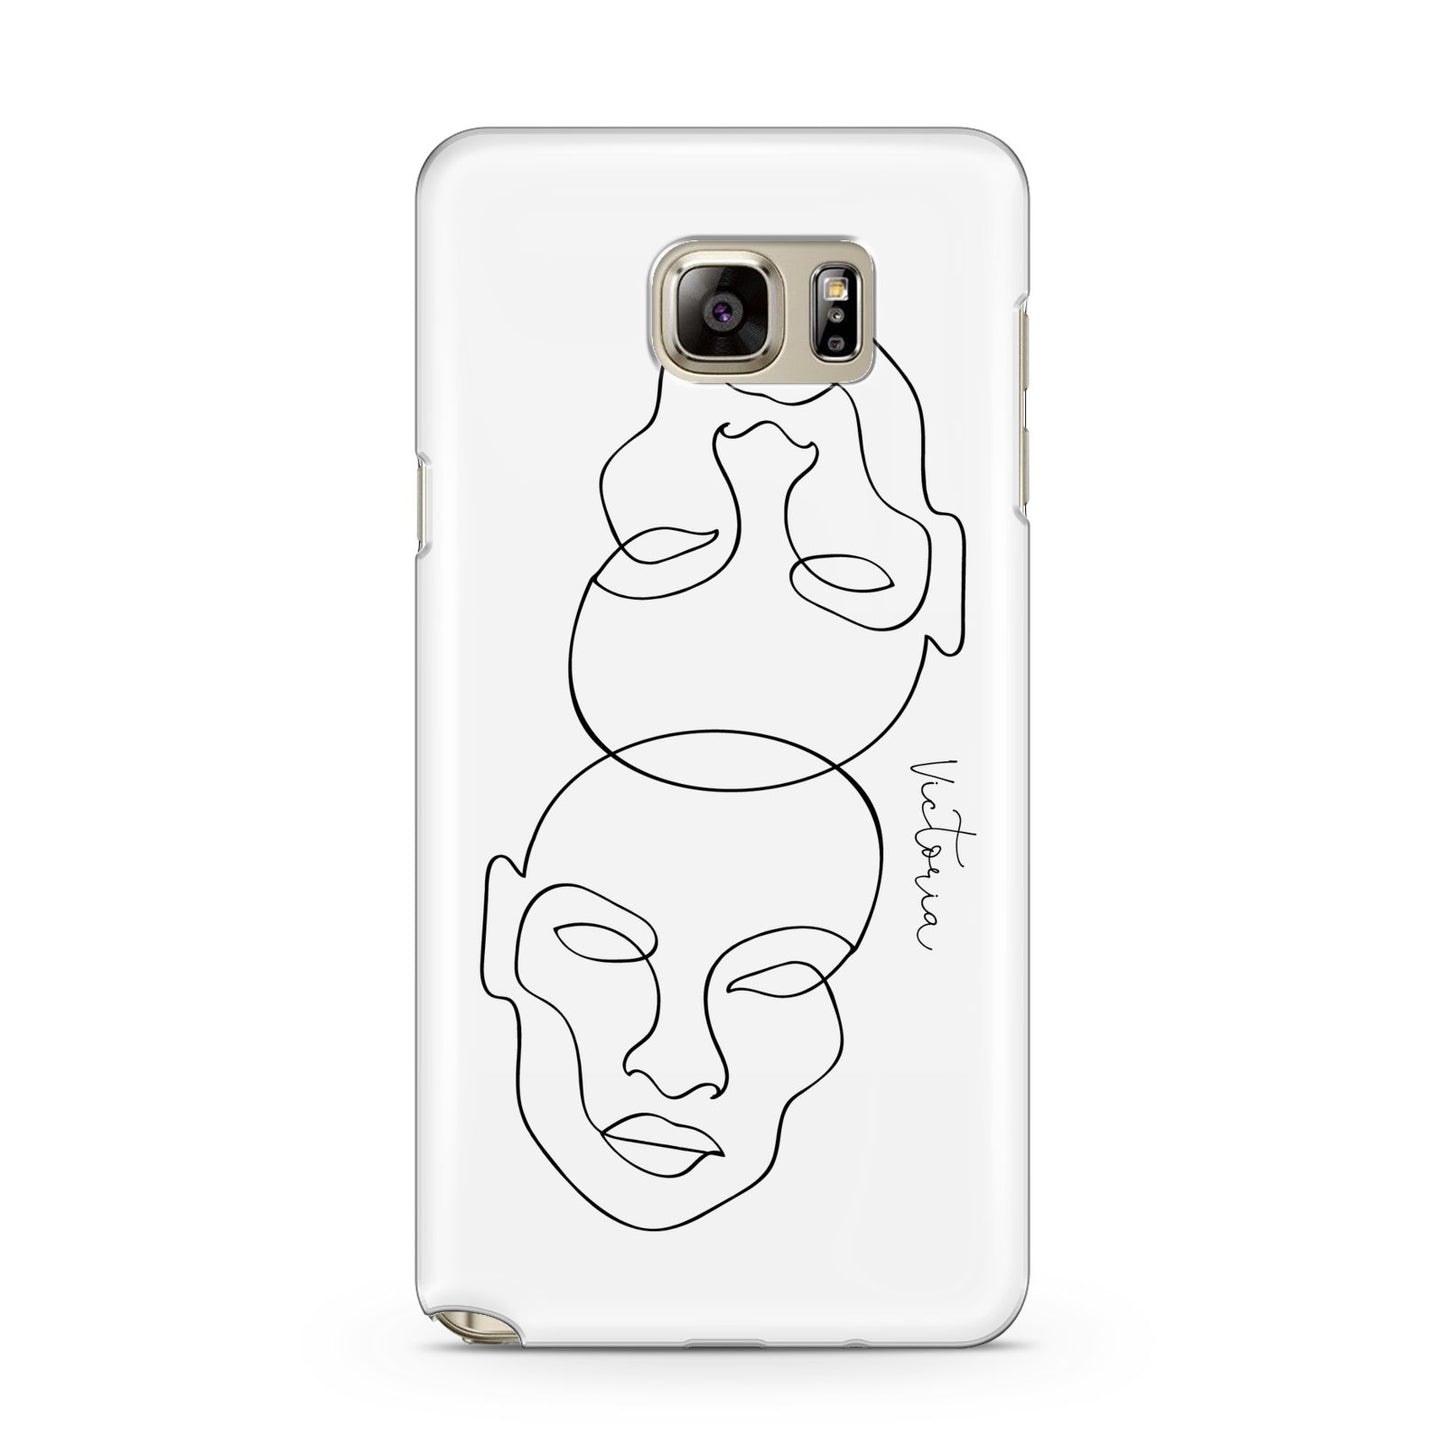 Personalised White Line Art Samsung Galaxy Note 5 Case